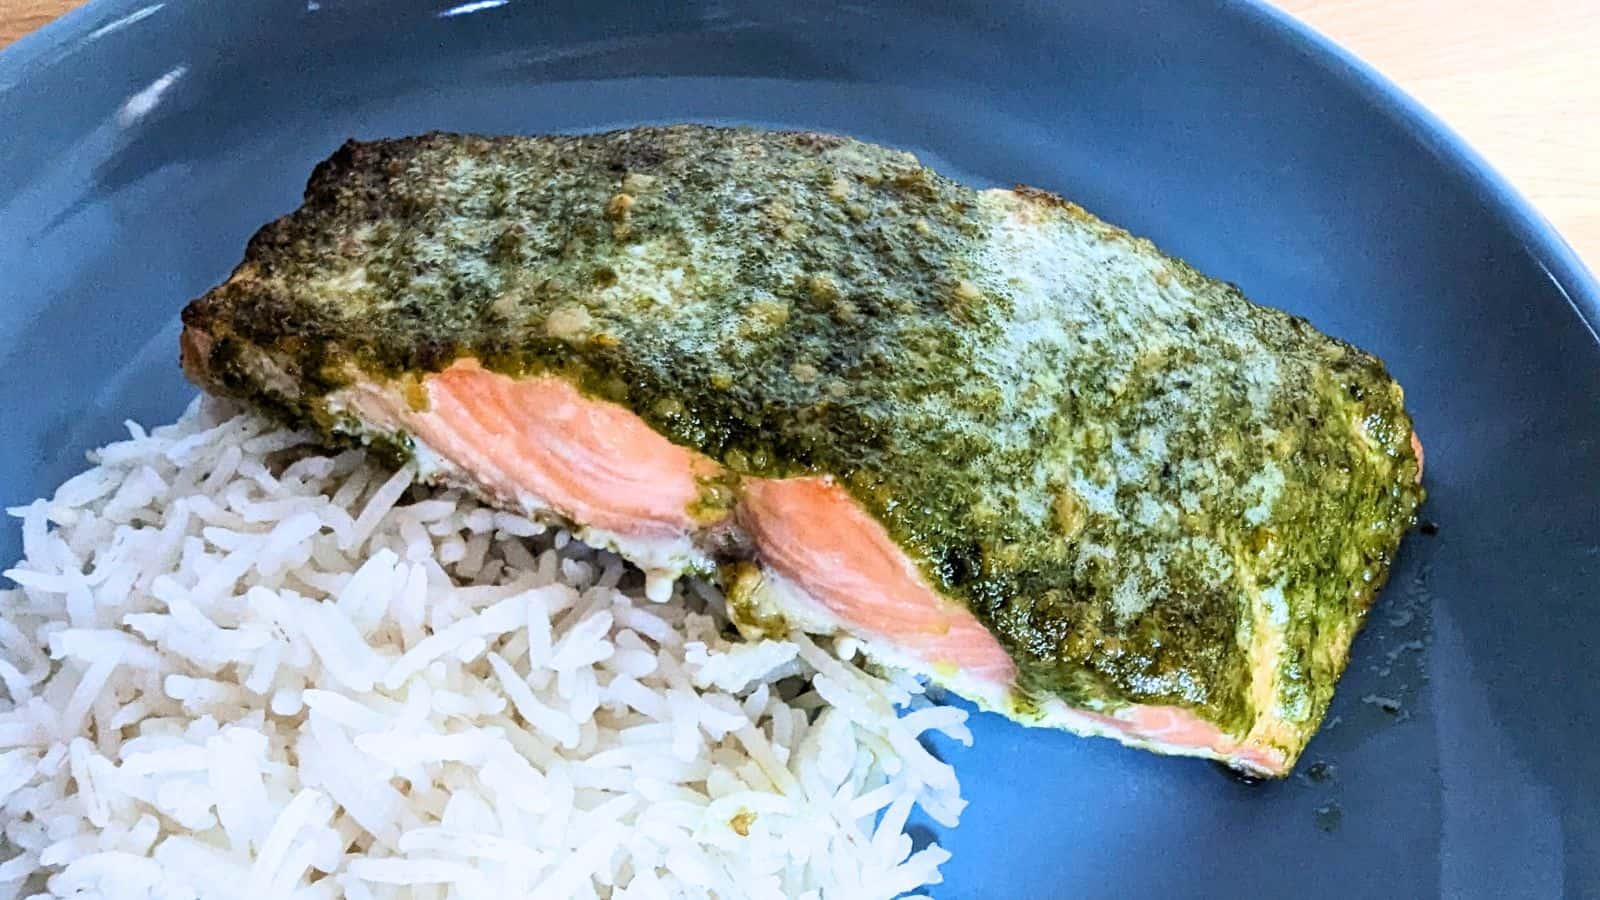 Image shows Salmon with pesto and rice on a blue plate.